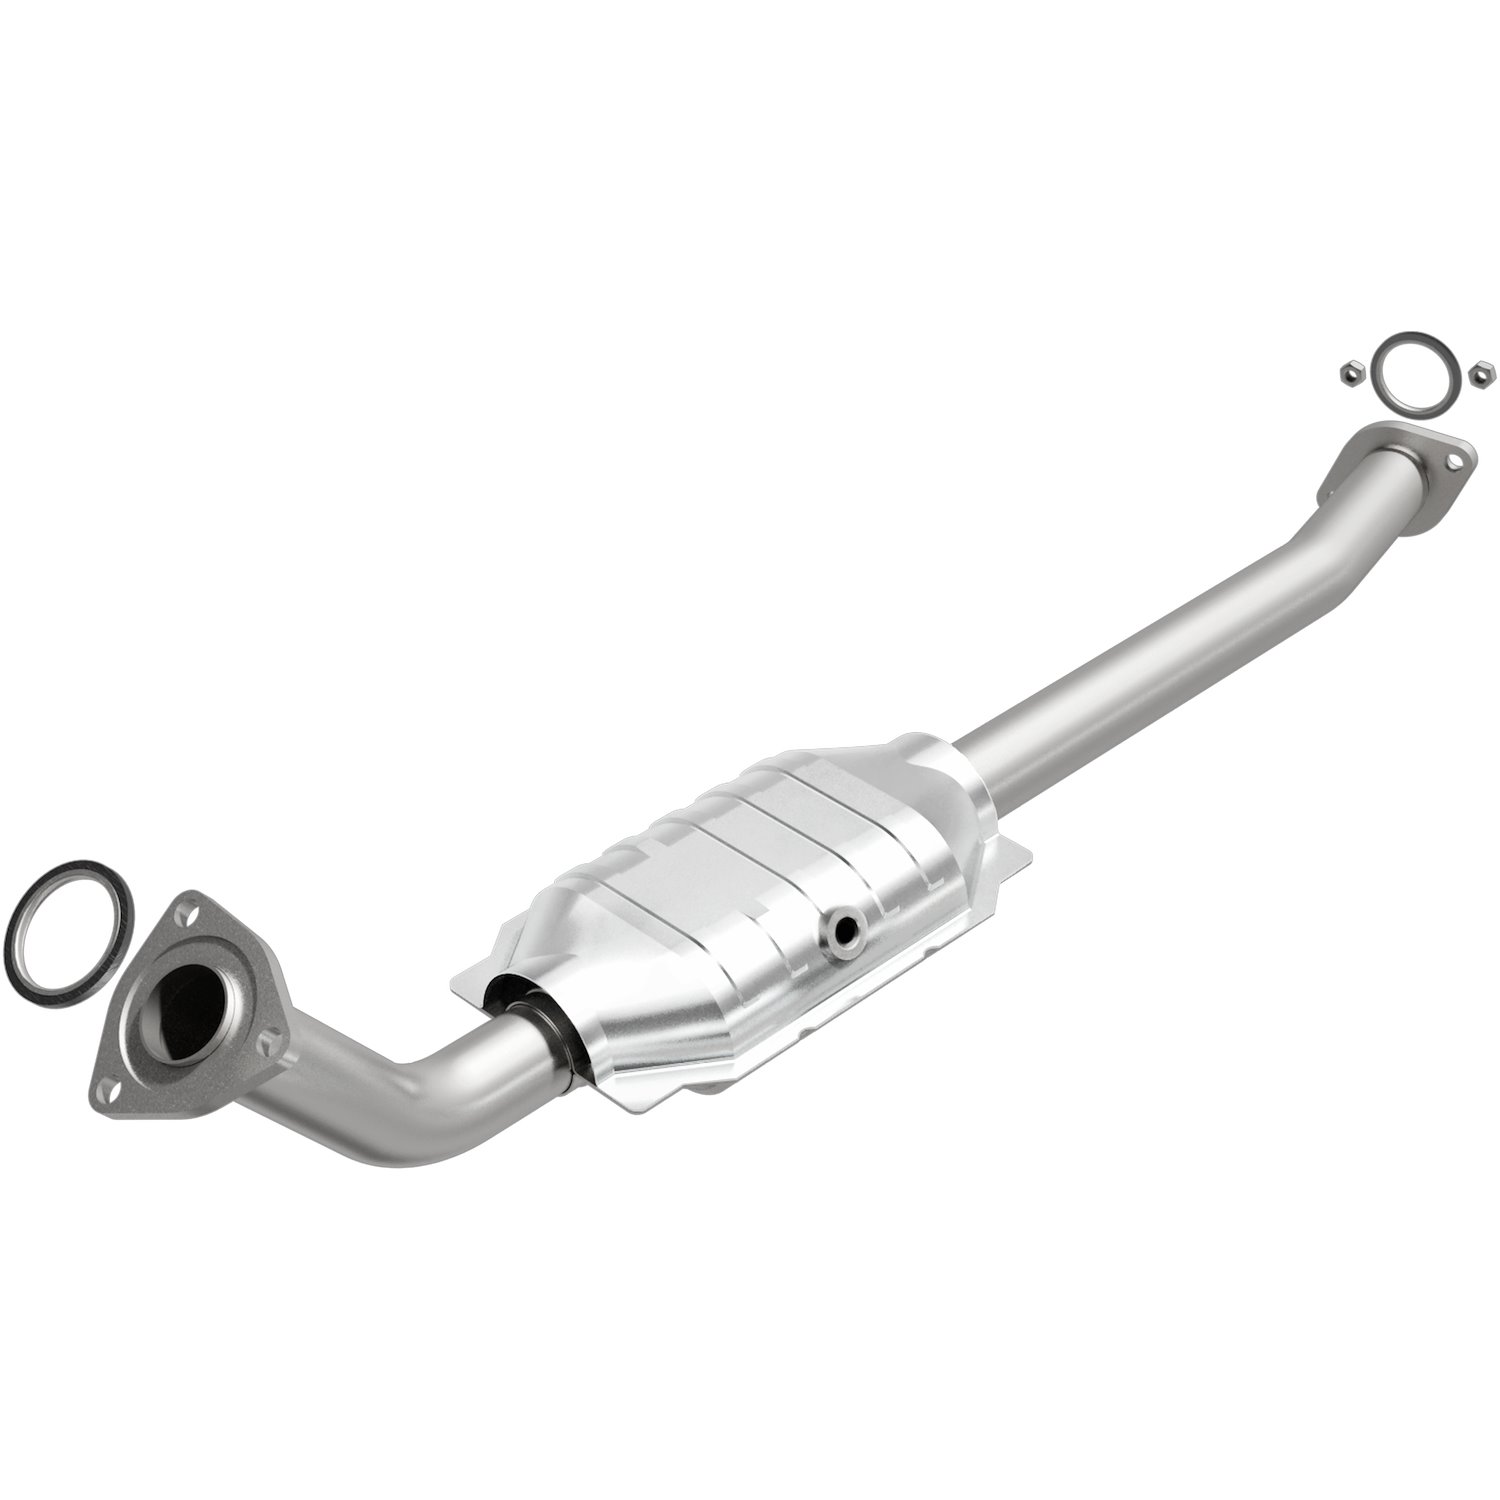 2005-2007 Toyota Sequoia OEM Grade Federal / EPA Compliant Direct-Fit Catalytic Converter